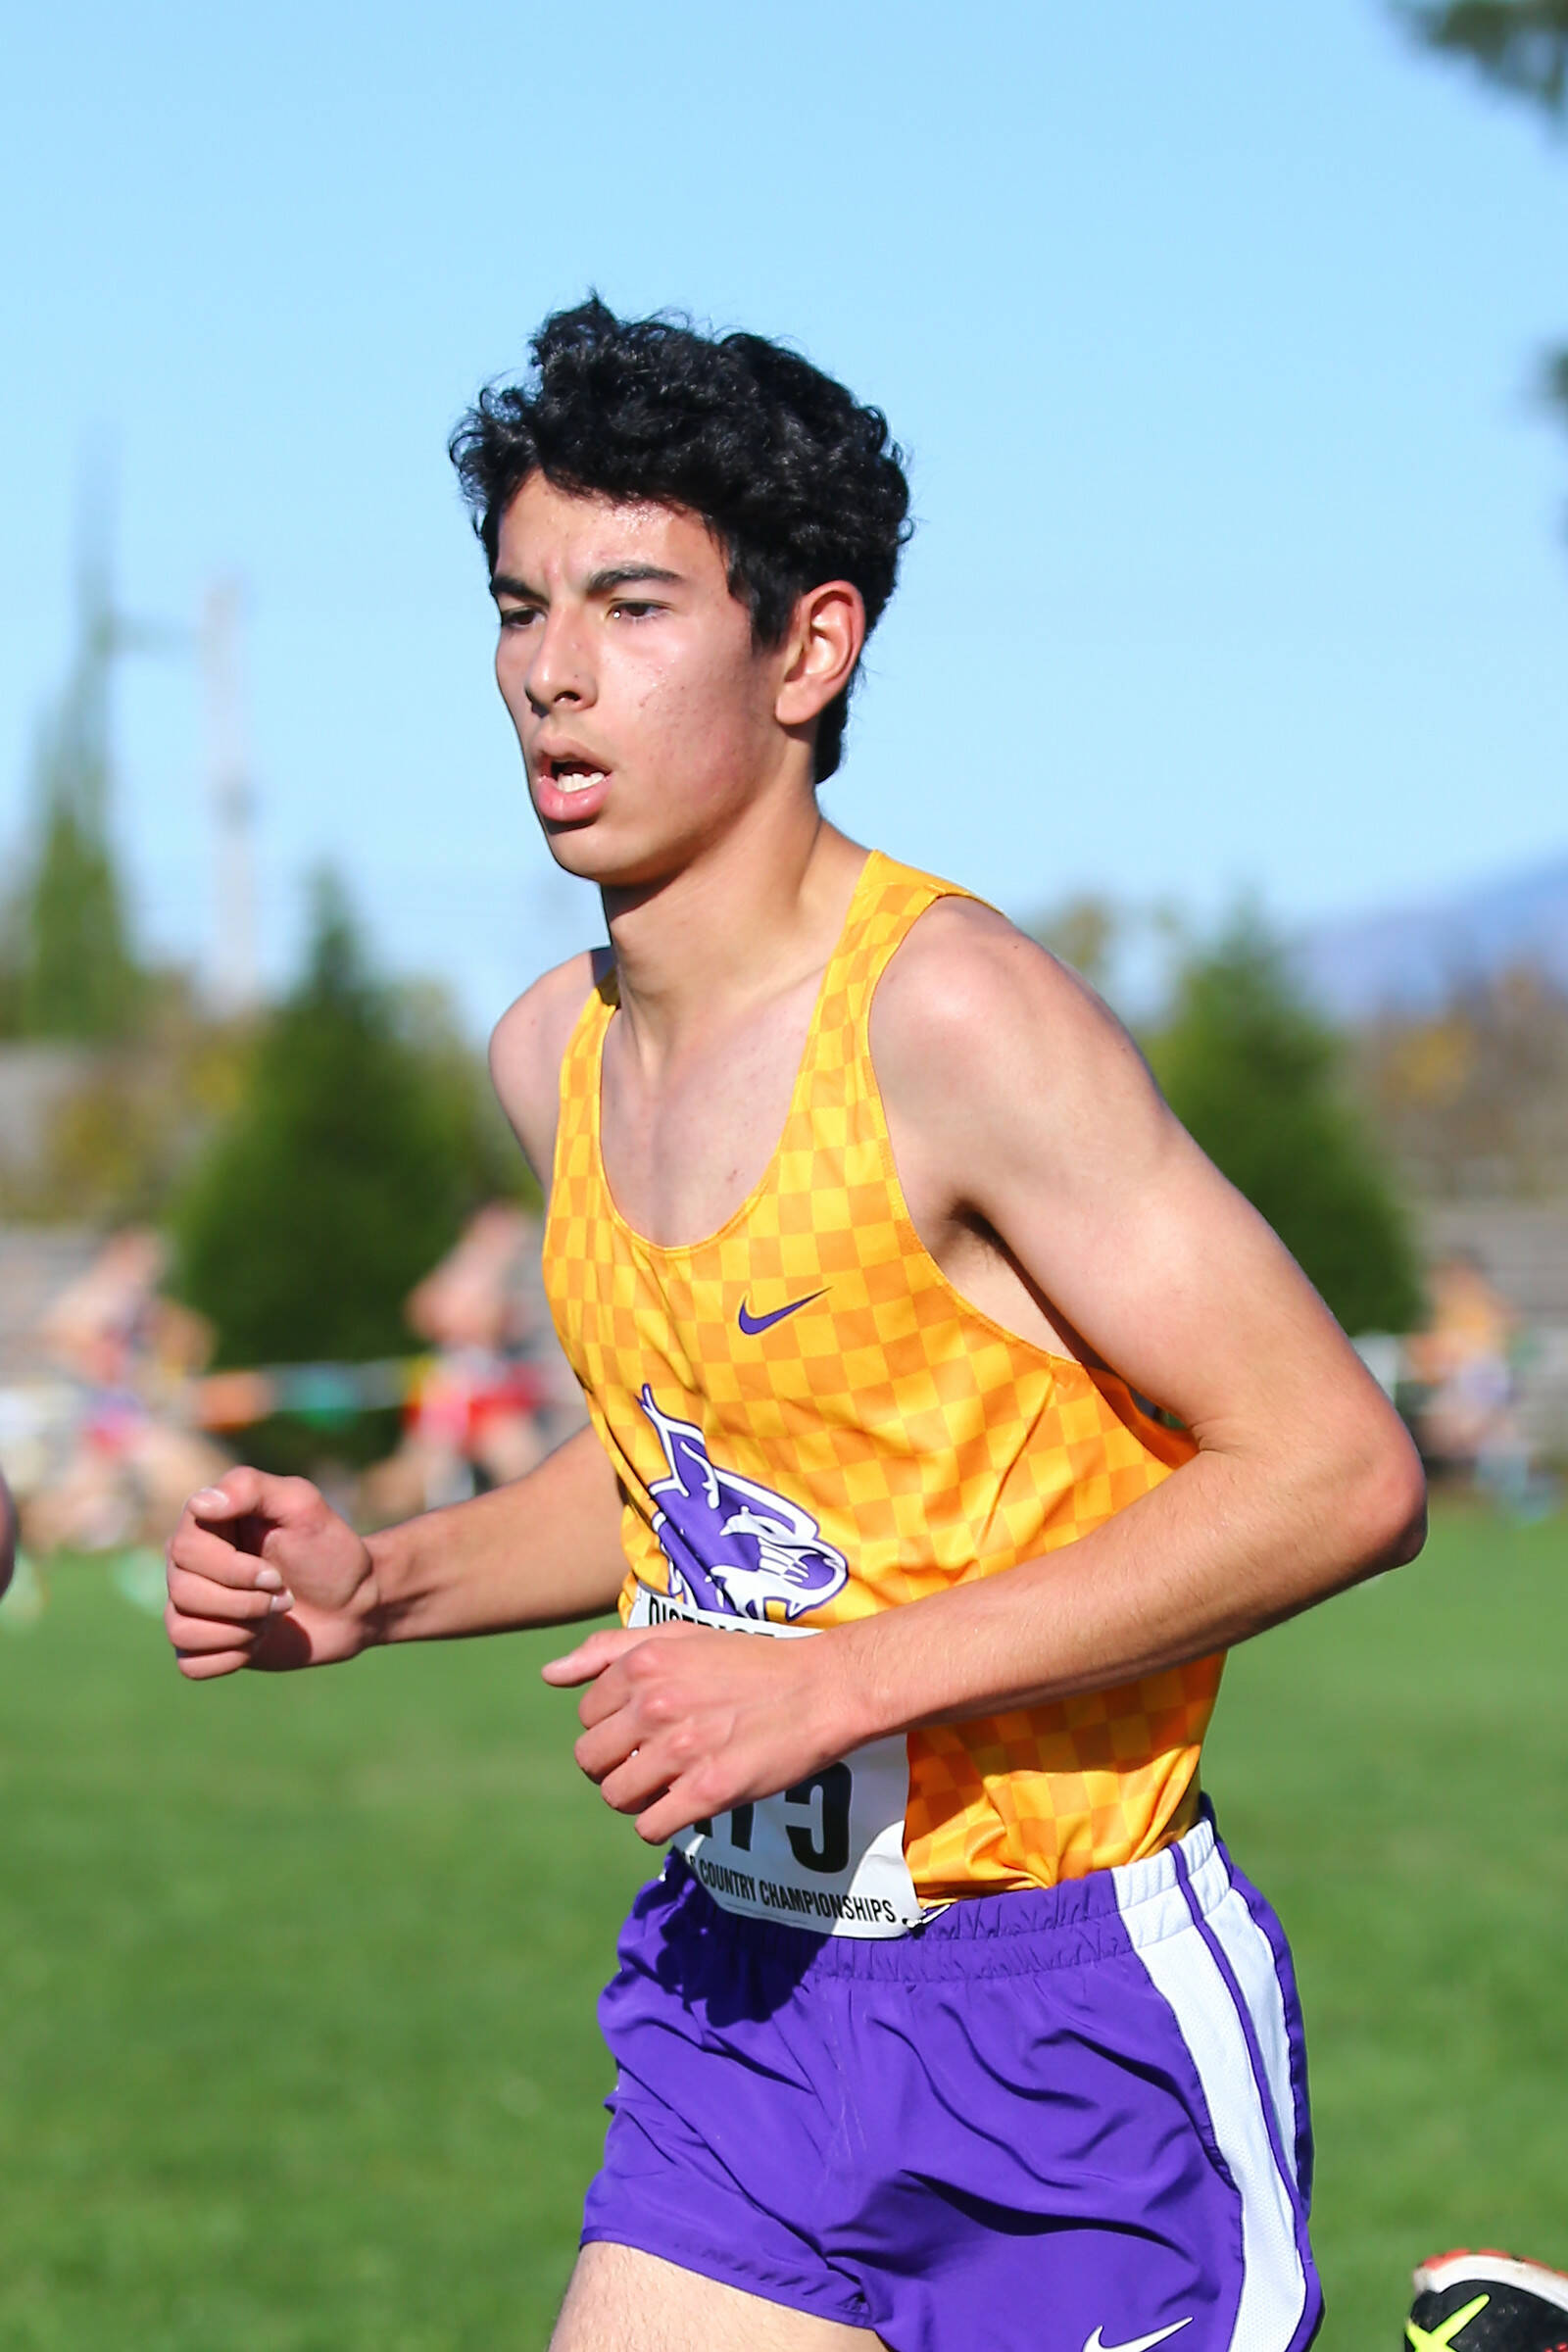 Senior Jacob Pearson came in 12th place at the district cross country meet Saturday. (Photo by John Fisken)